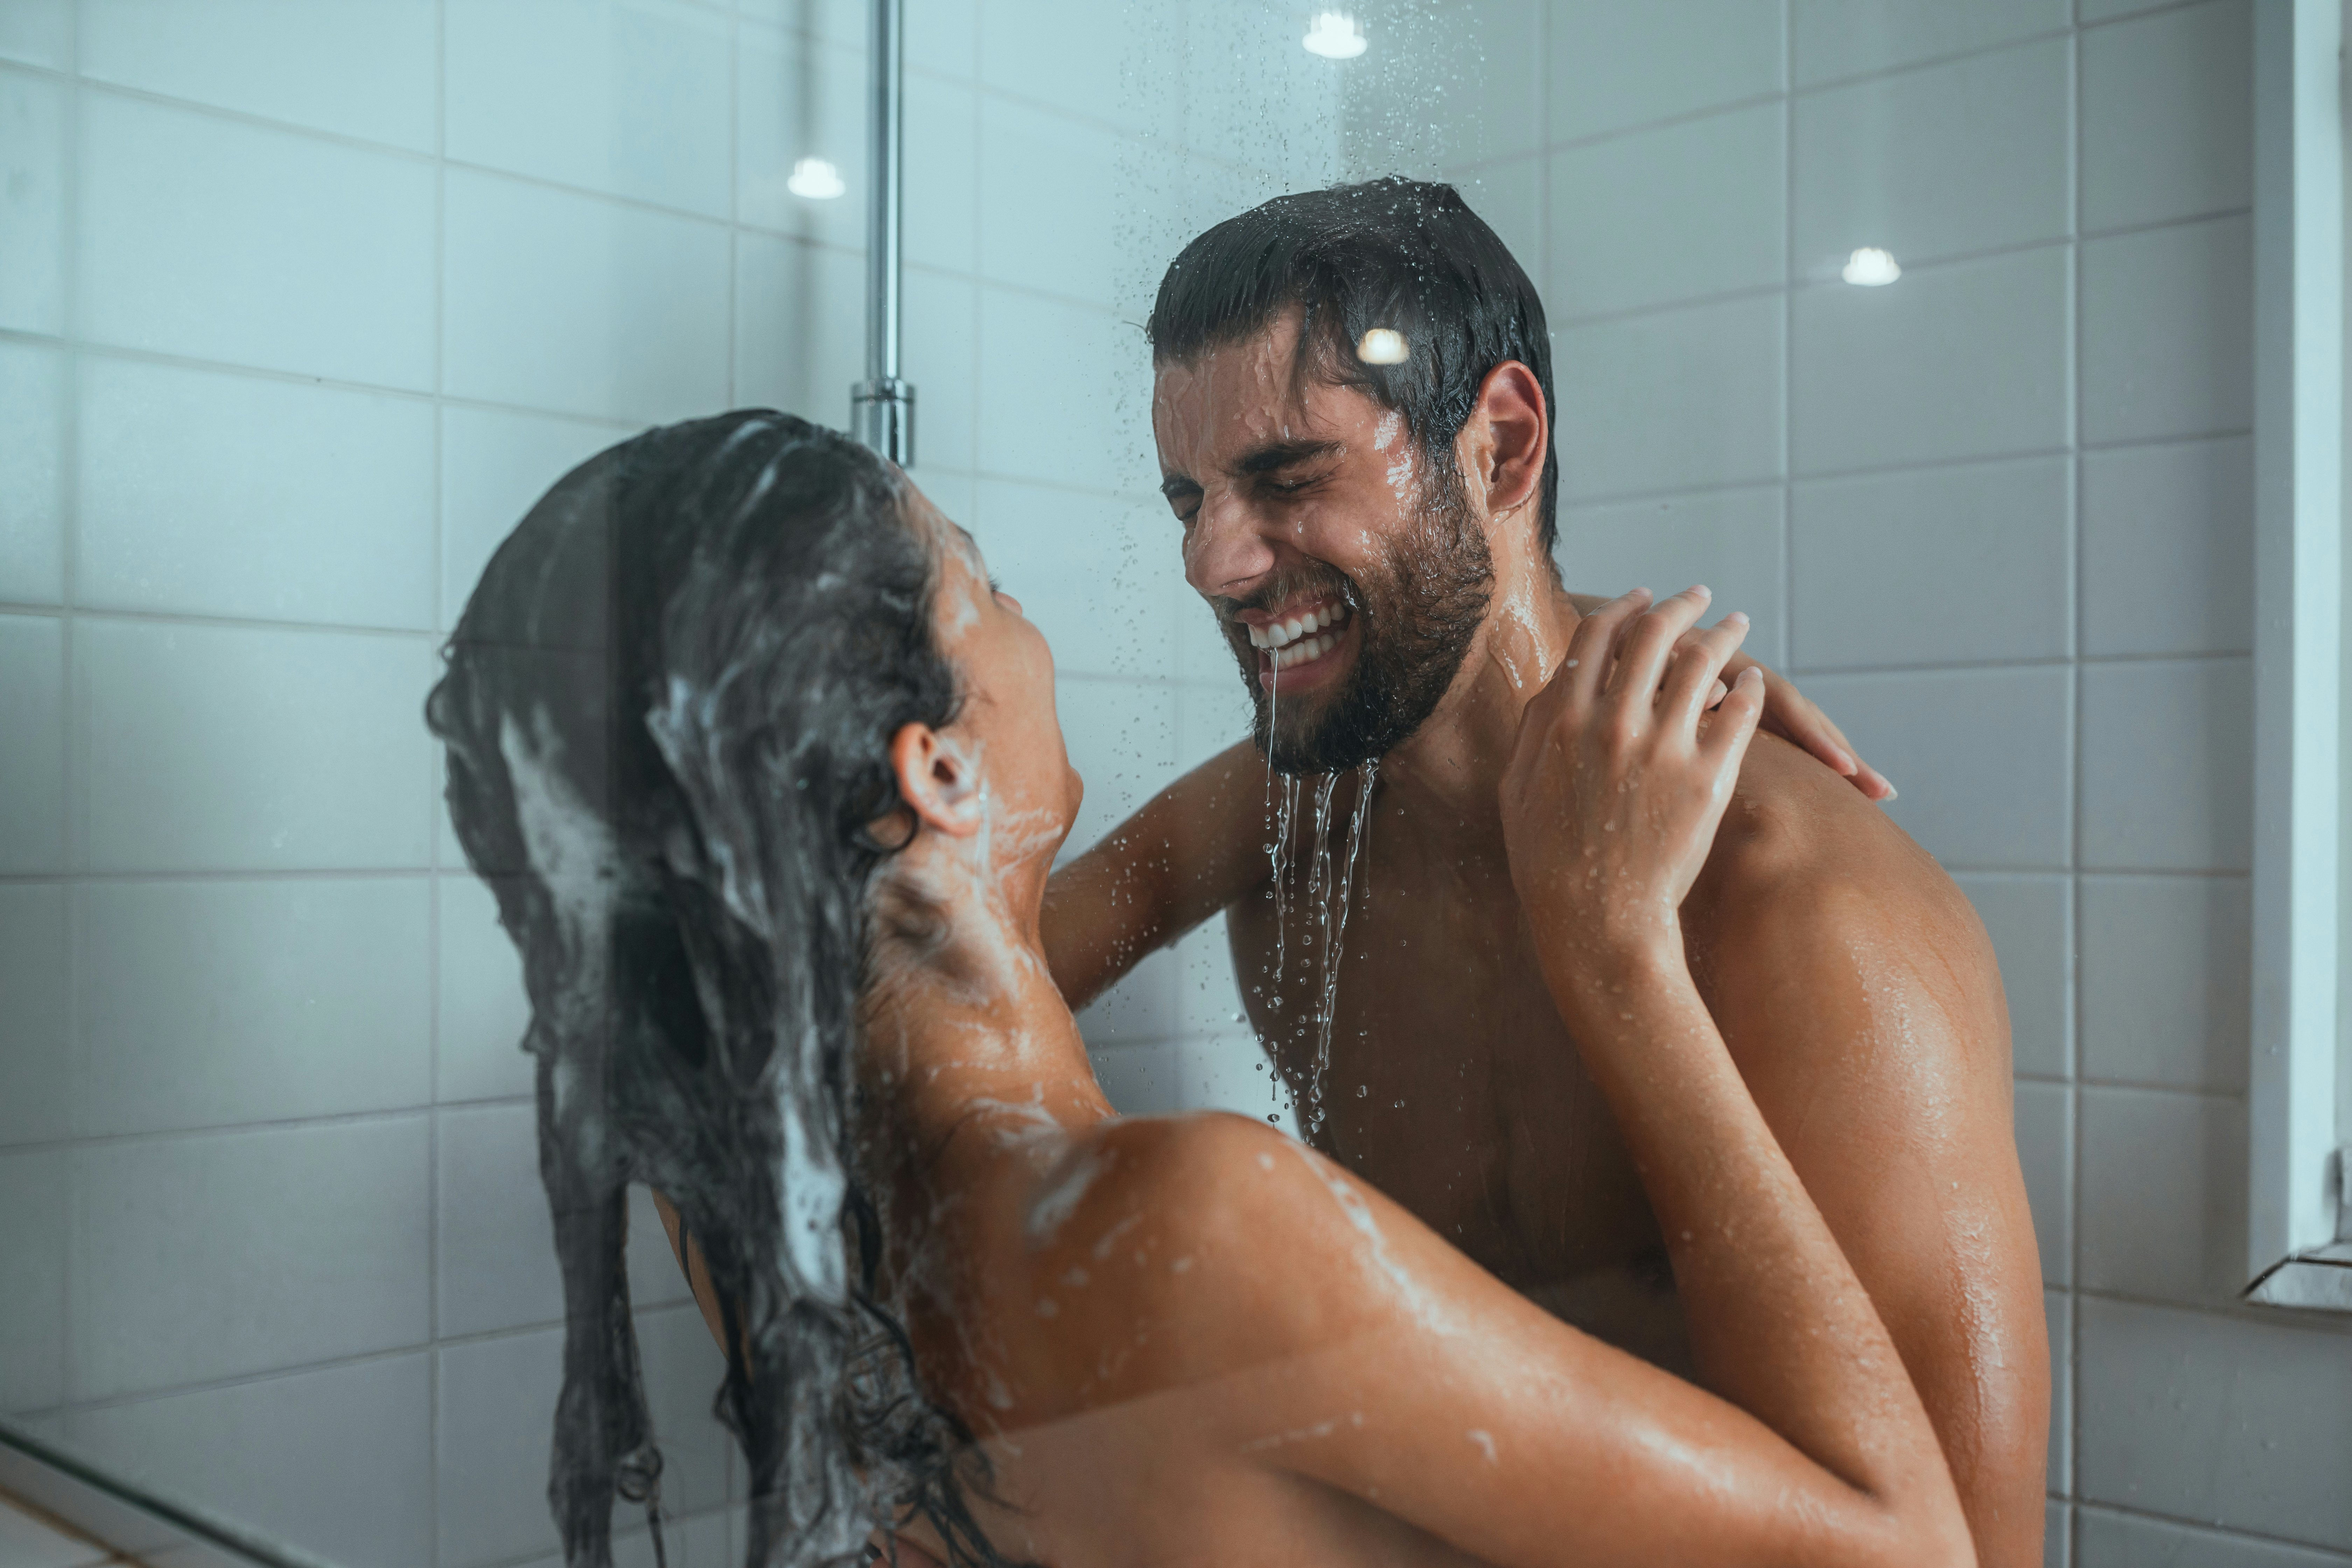 Hawt pair acquire soaked jointly underneath the shower